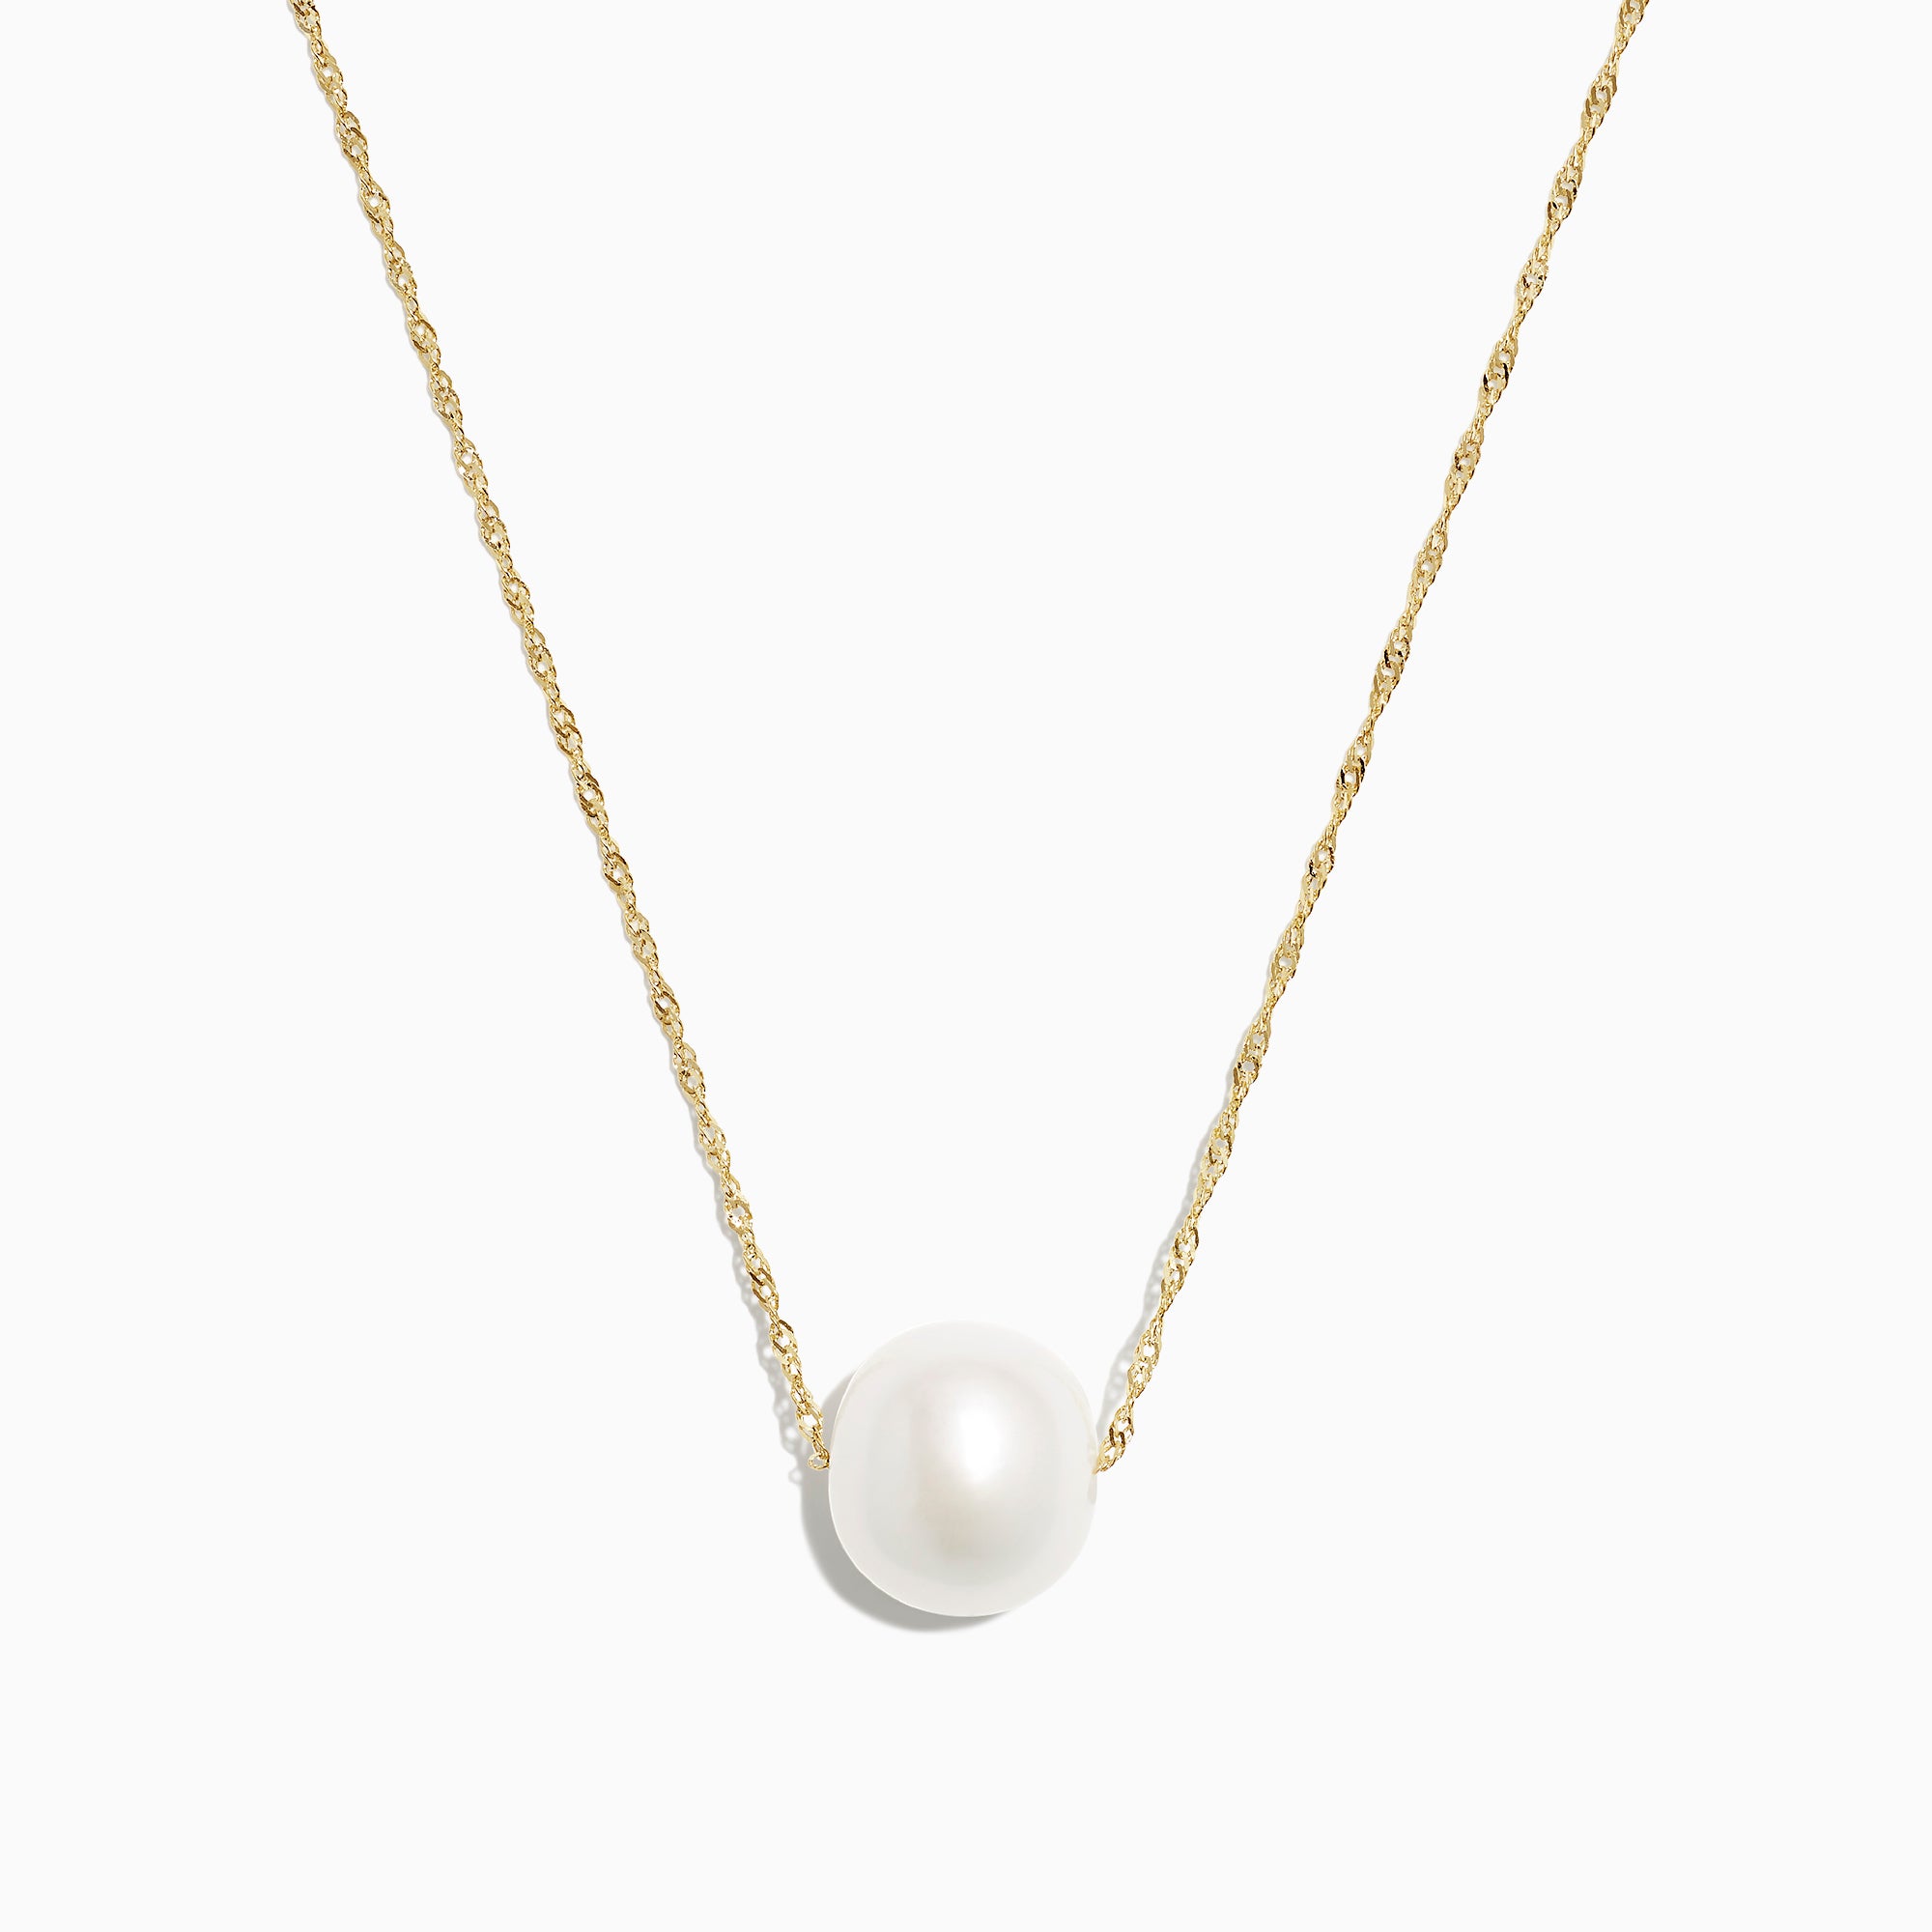 Effy 14K Yellow Gold Cultured Fresh Water Pearl Necklace